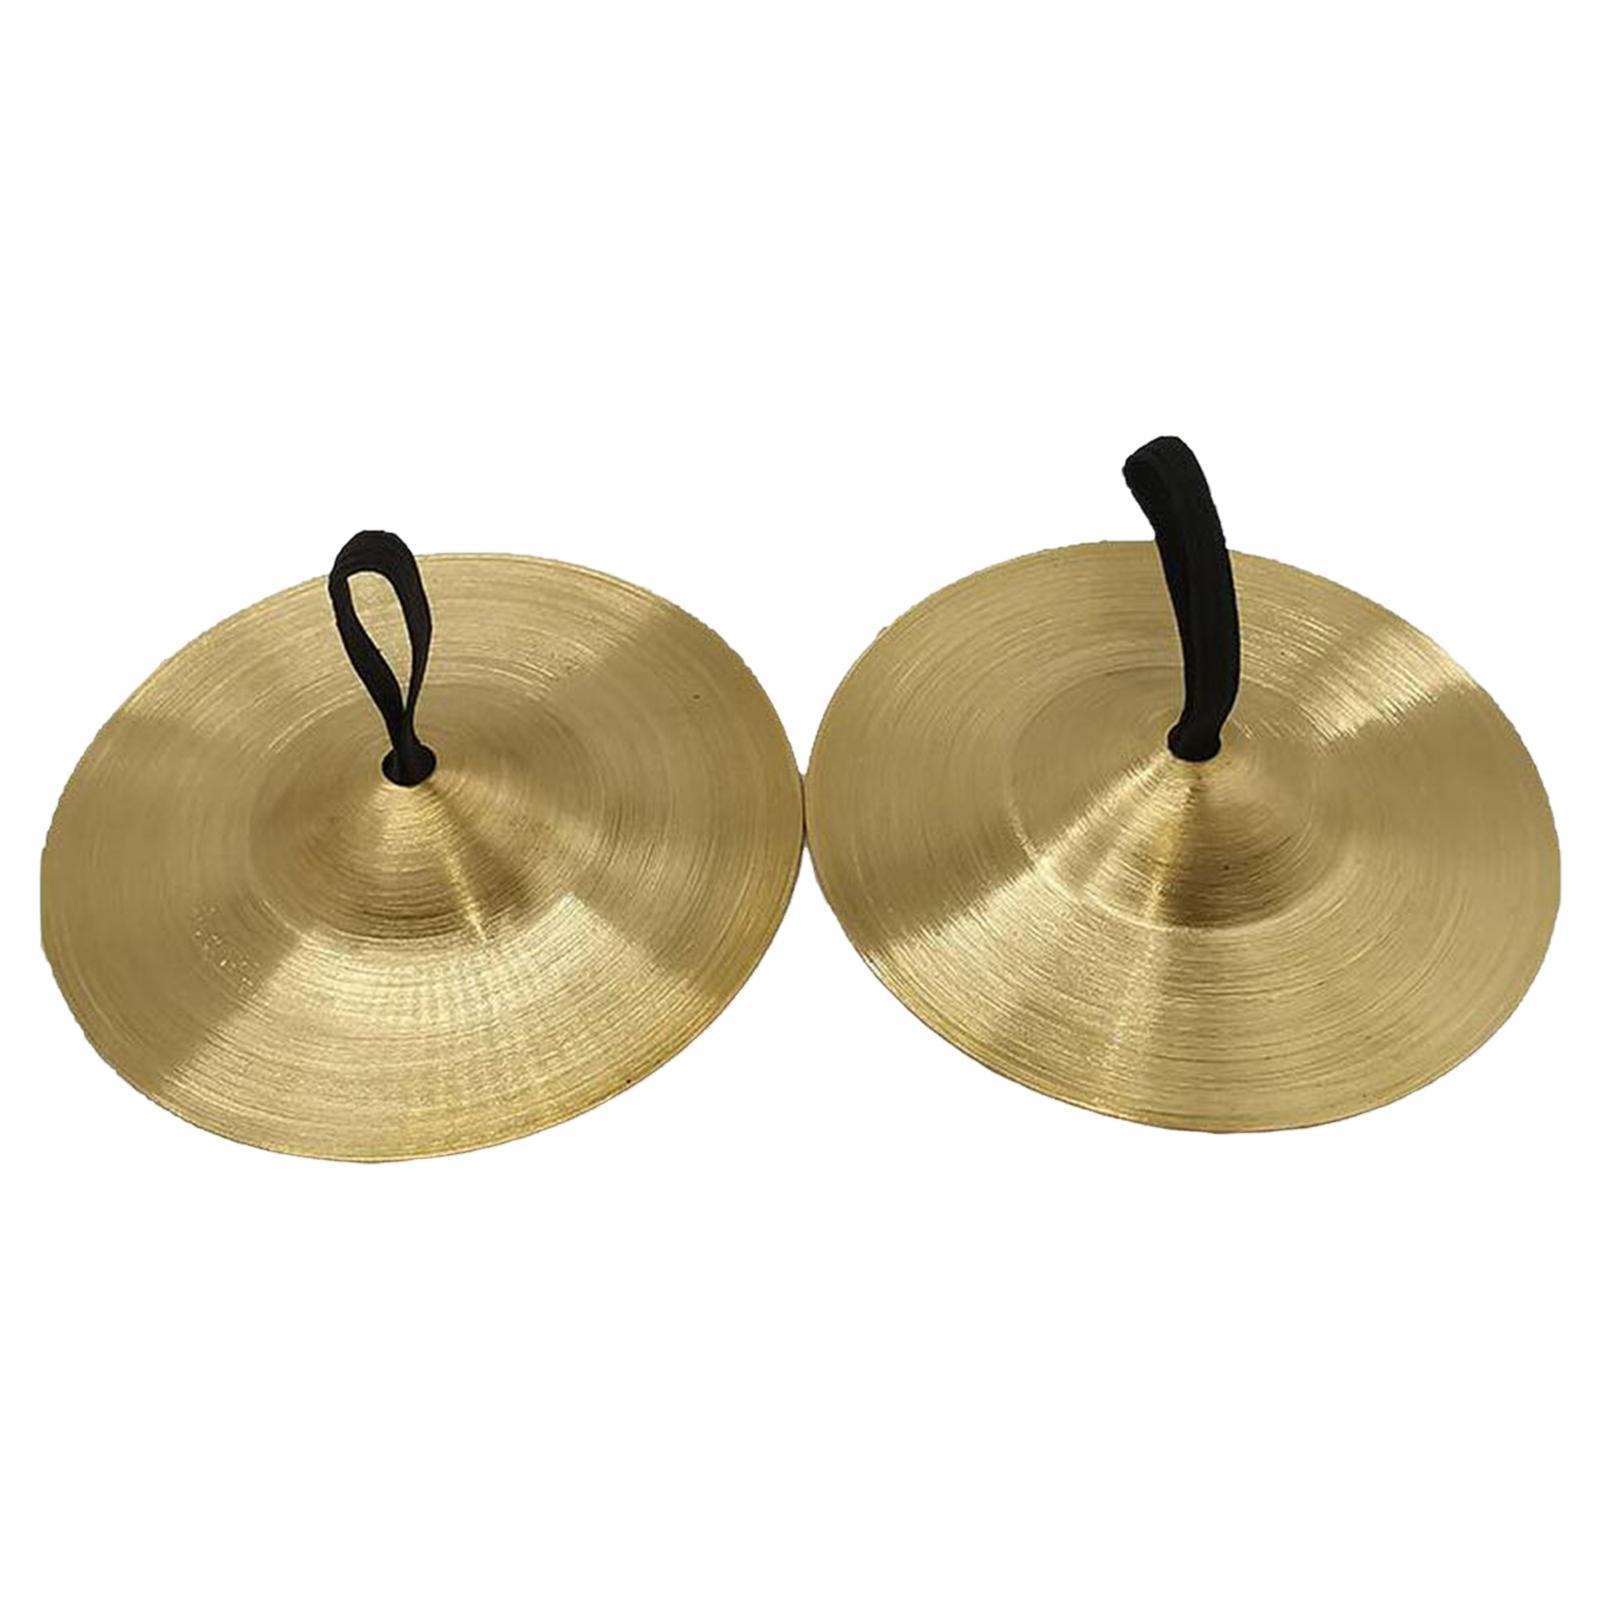 Hand Cymbals Kids Handheld Cymbals Musical Instrument copper Crash Cymbal for Kids ,Finger Cymbals for Activity, Events, Chorus, Presentations 9cm - image 3 of 8